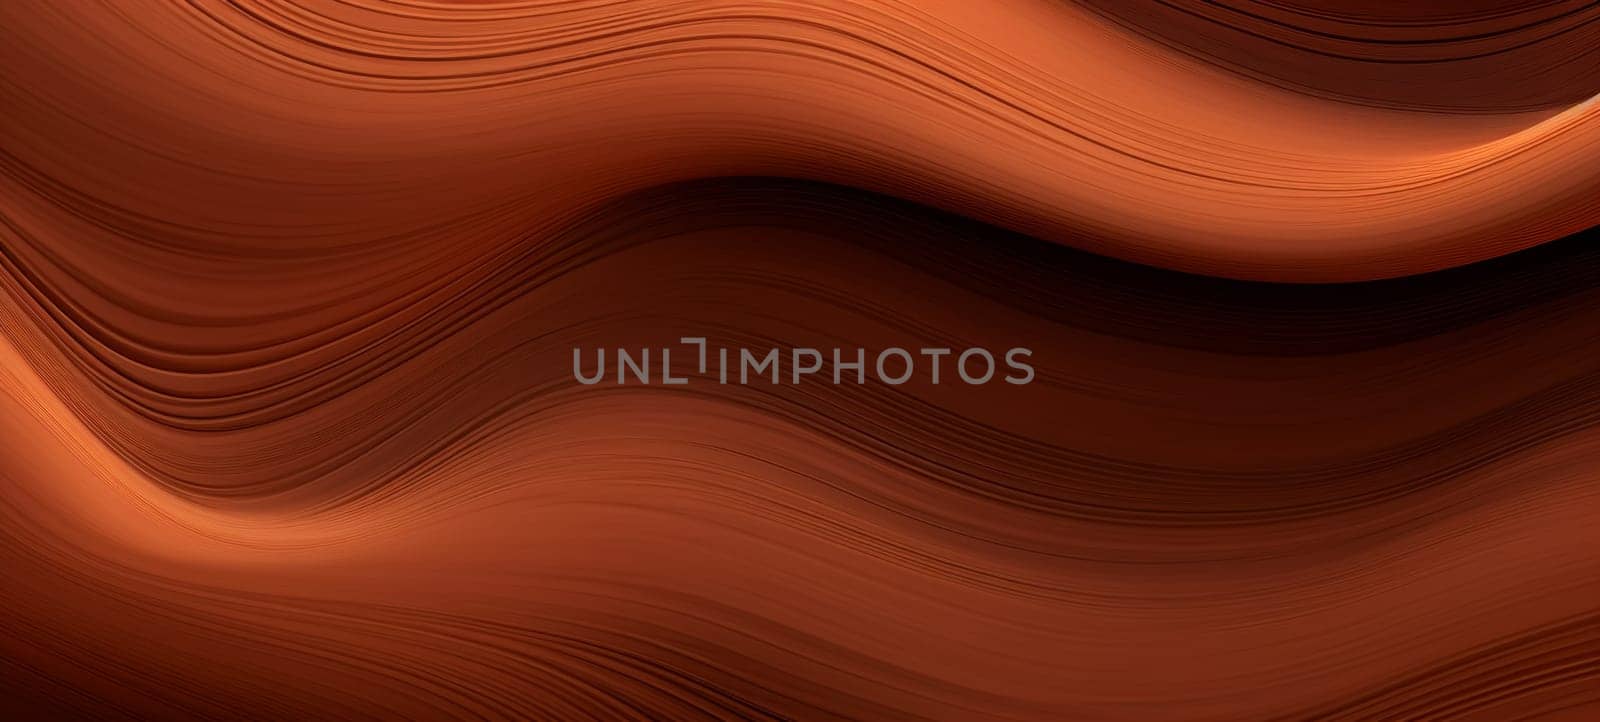 A mesmerizing abstract image showcasing waves of wooden texture in varying shades of orange, creating a visually soothing yet dynamic pattern